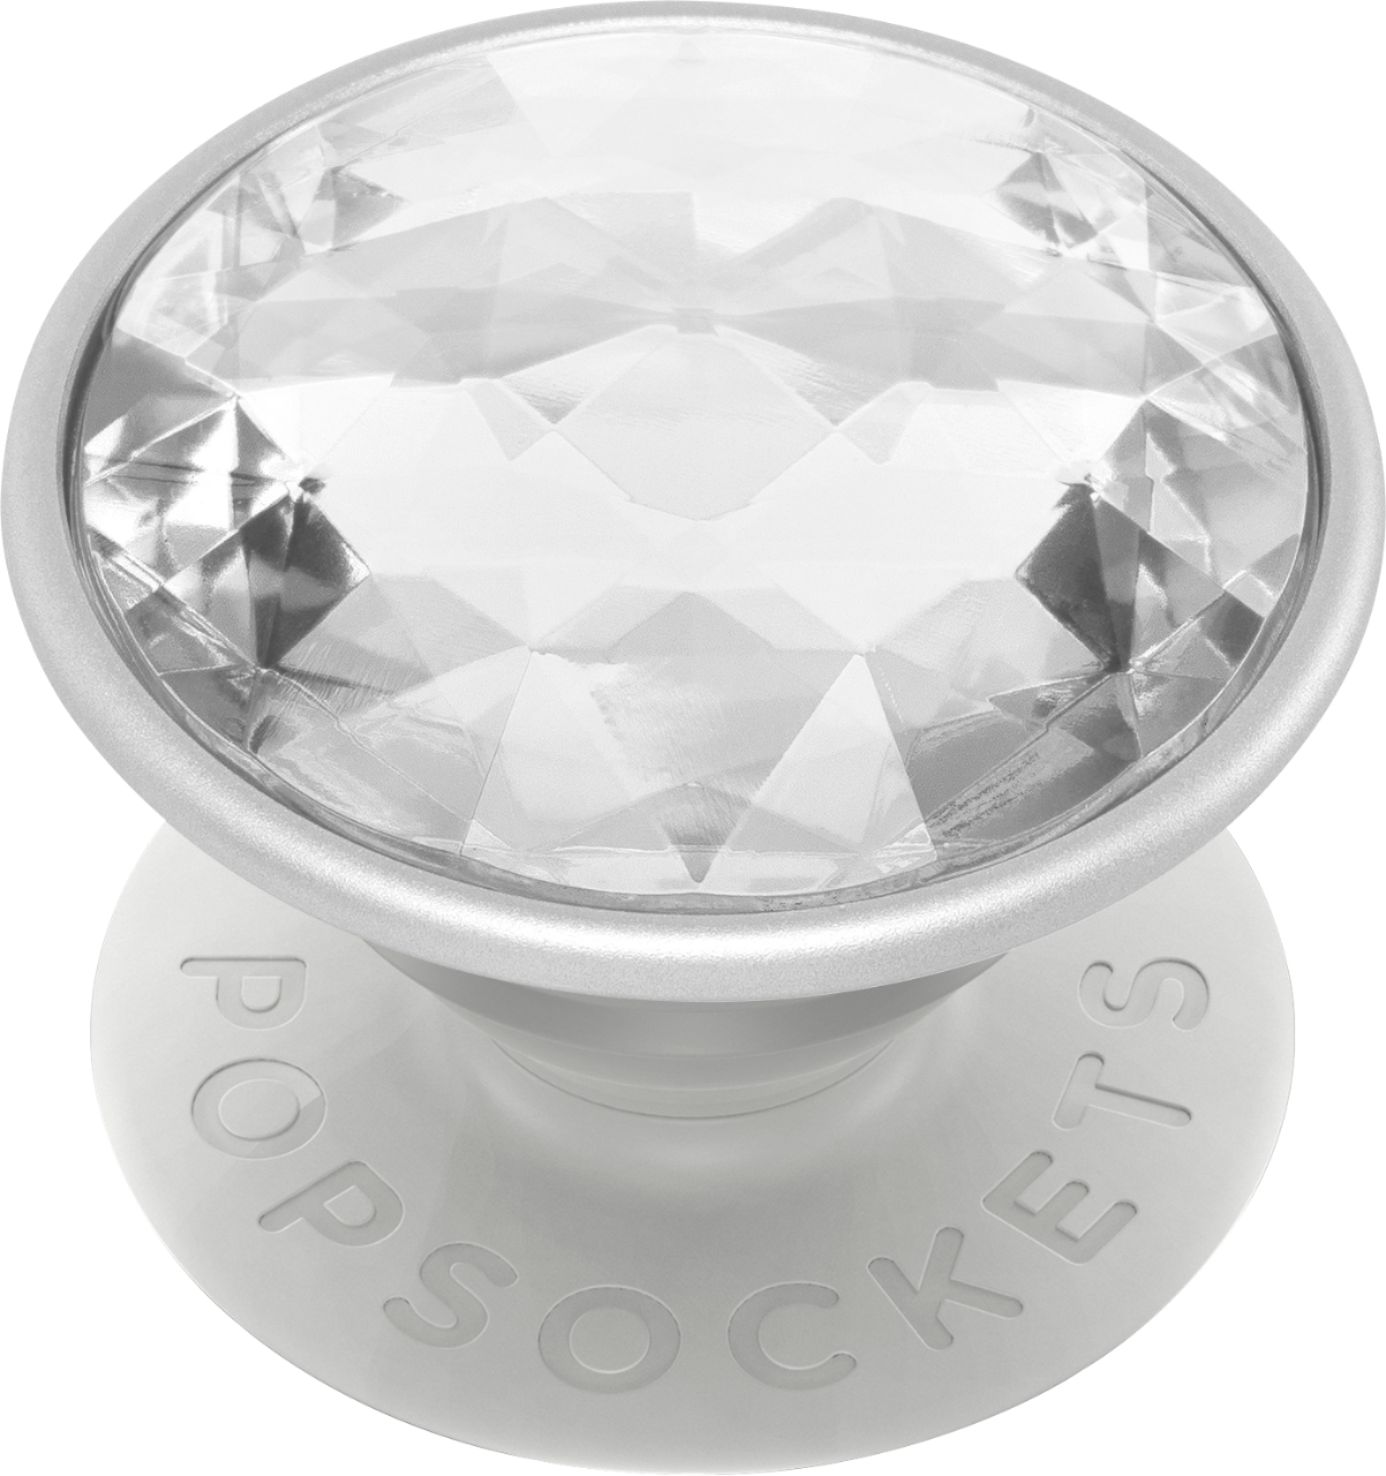 Popsockets Popgrip Cell Phone Grip & Stand - Clear Glitter Silver